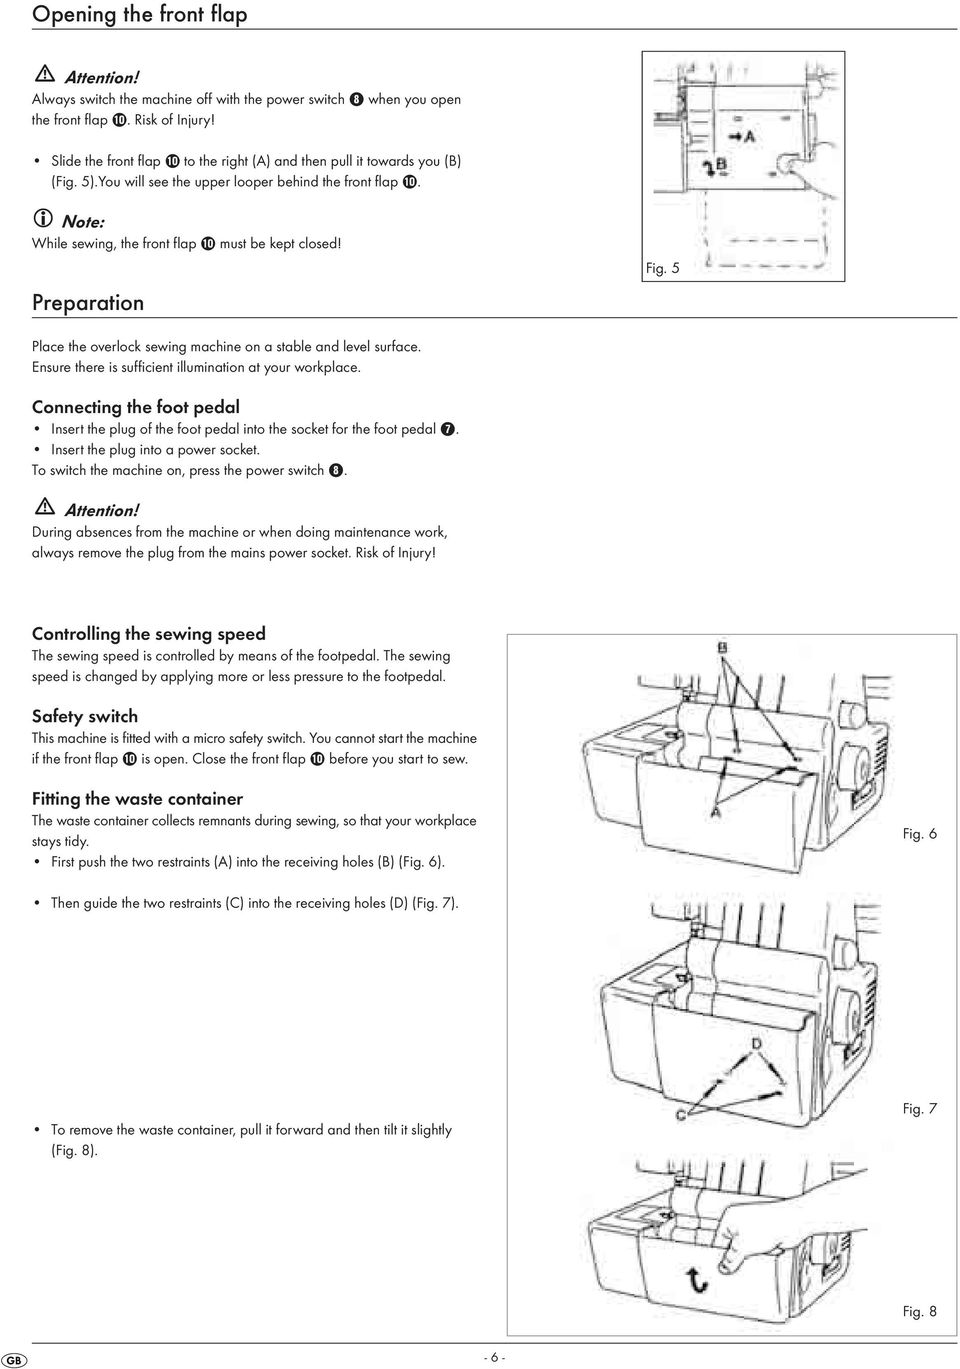 Preparation Fig. 5 Place the overlock sewing machine on a stable and level surface. Ensure there is sufficient illumination at your workplace.